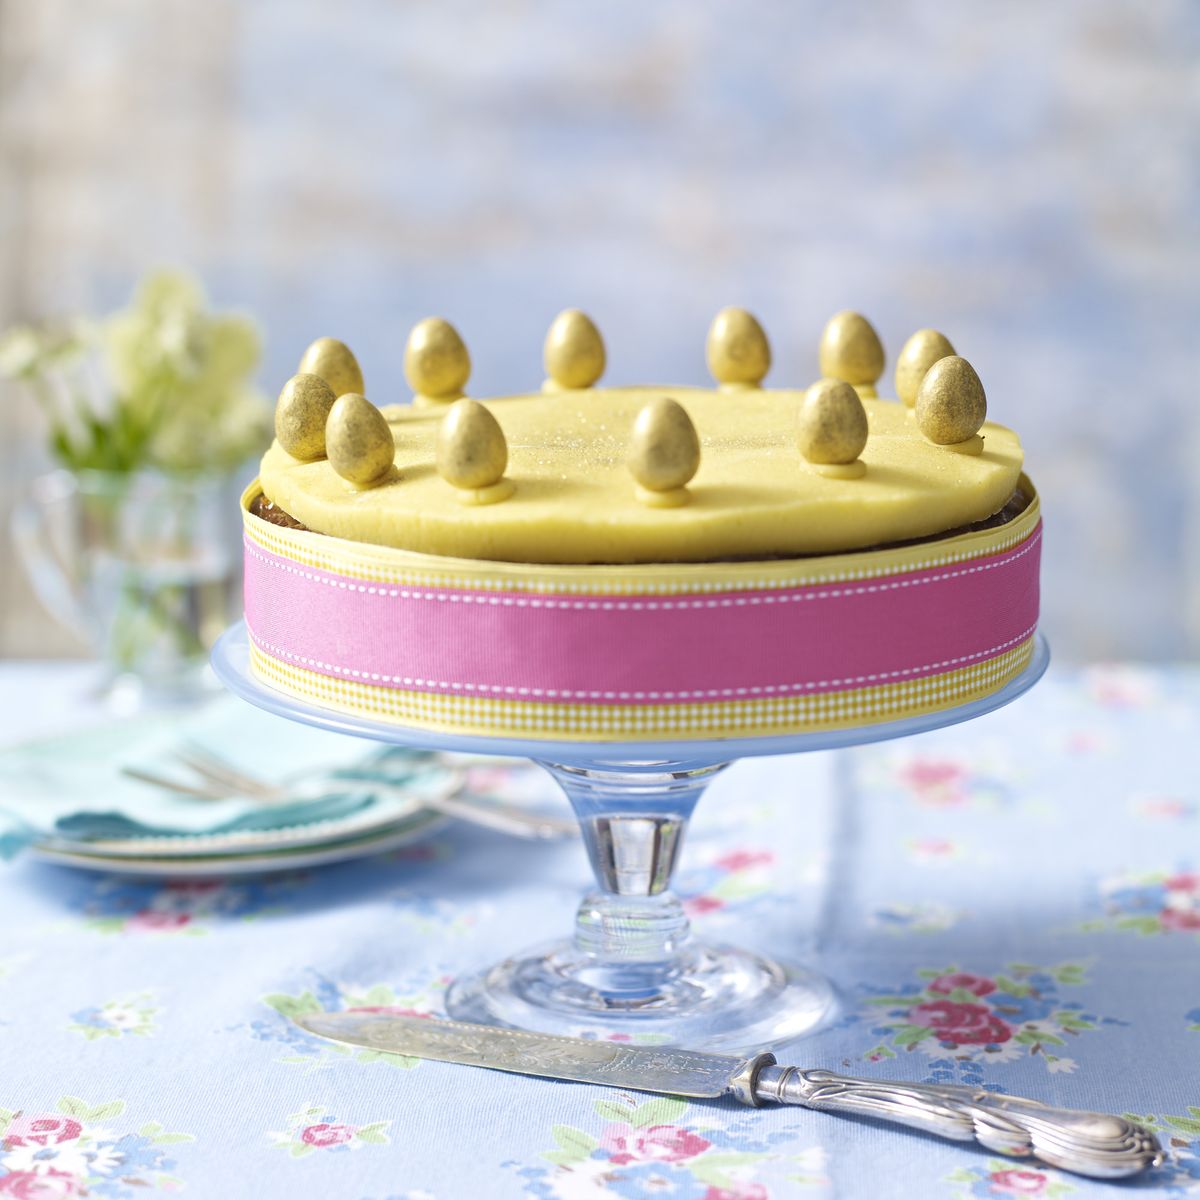 Get into the Easter spirit with this divine chocolate simnel cake